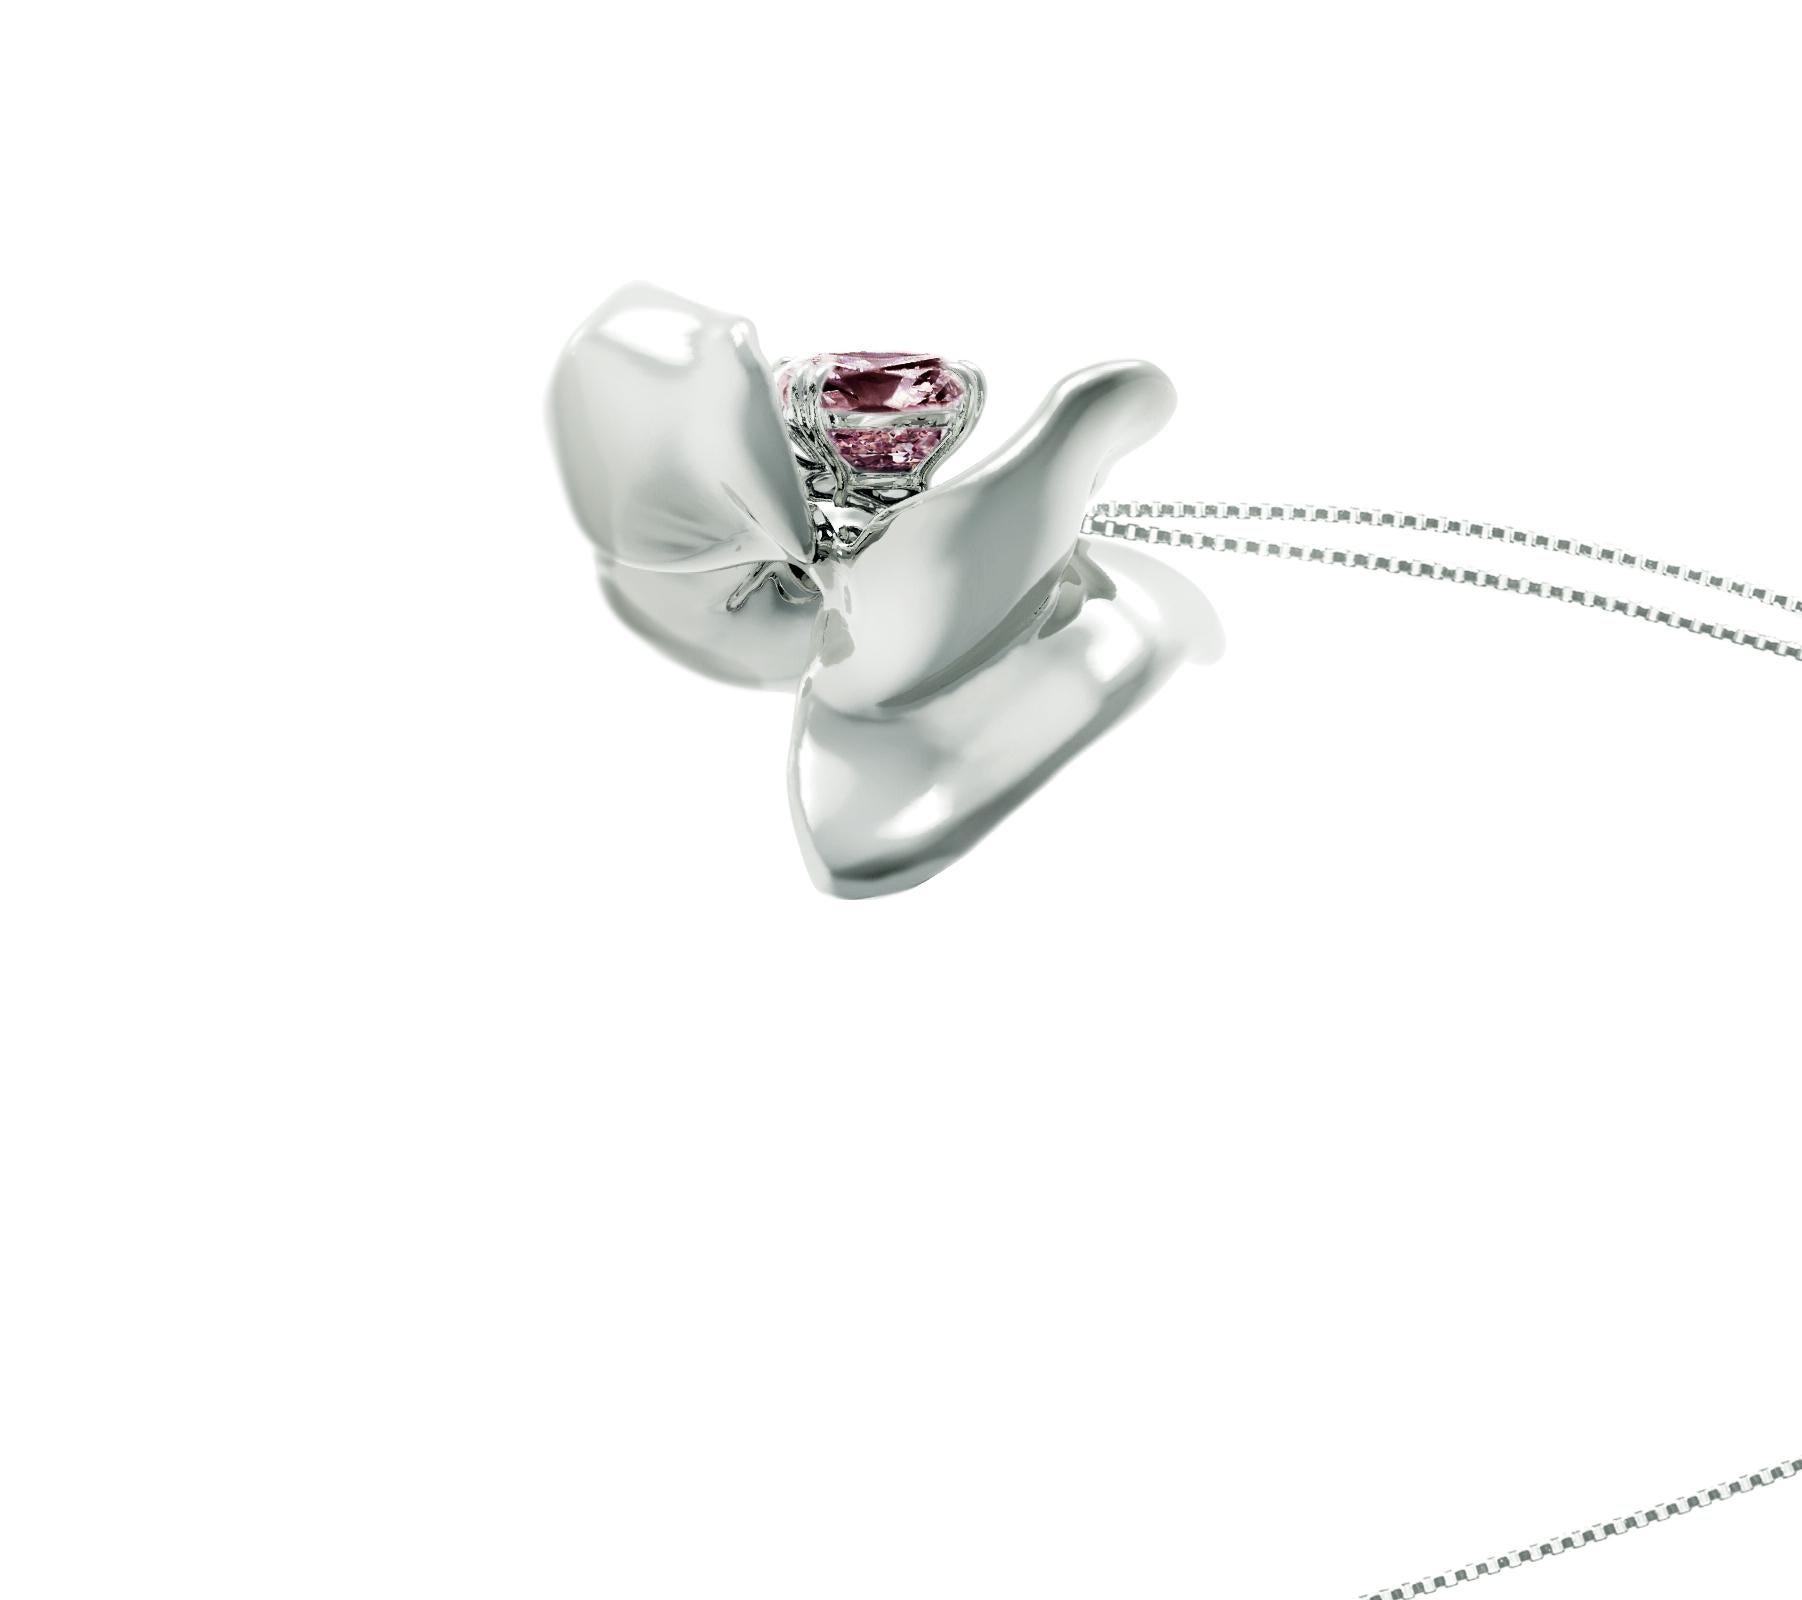 This Magnolia Flower contemporary pendant necklace is made of 18 karat white gold with storm purple cushion spinel (1.3 carats). The tender water-surface of the spinel multiplies the light, mirroring on the golden petals. The weight of the piece is